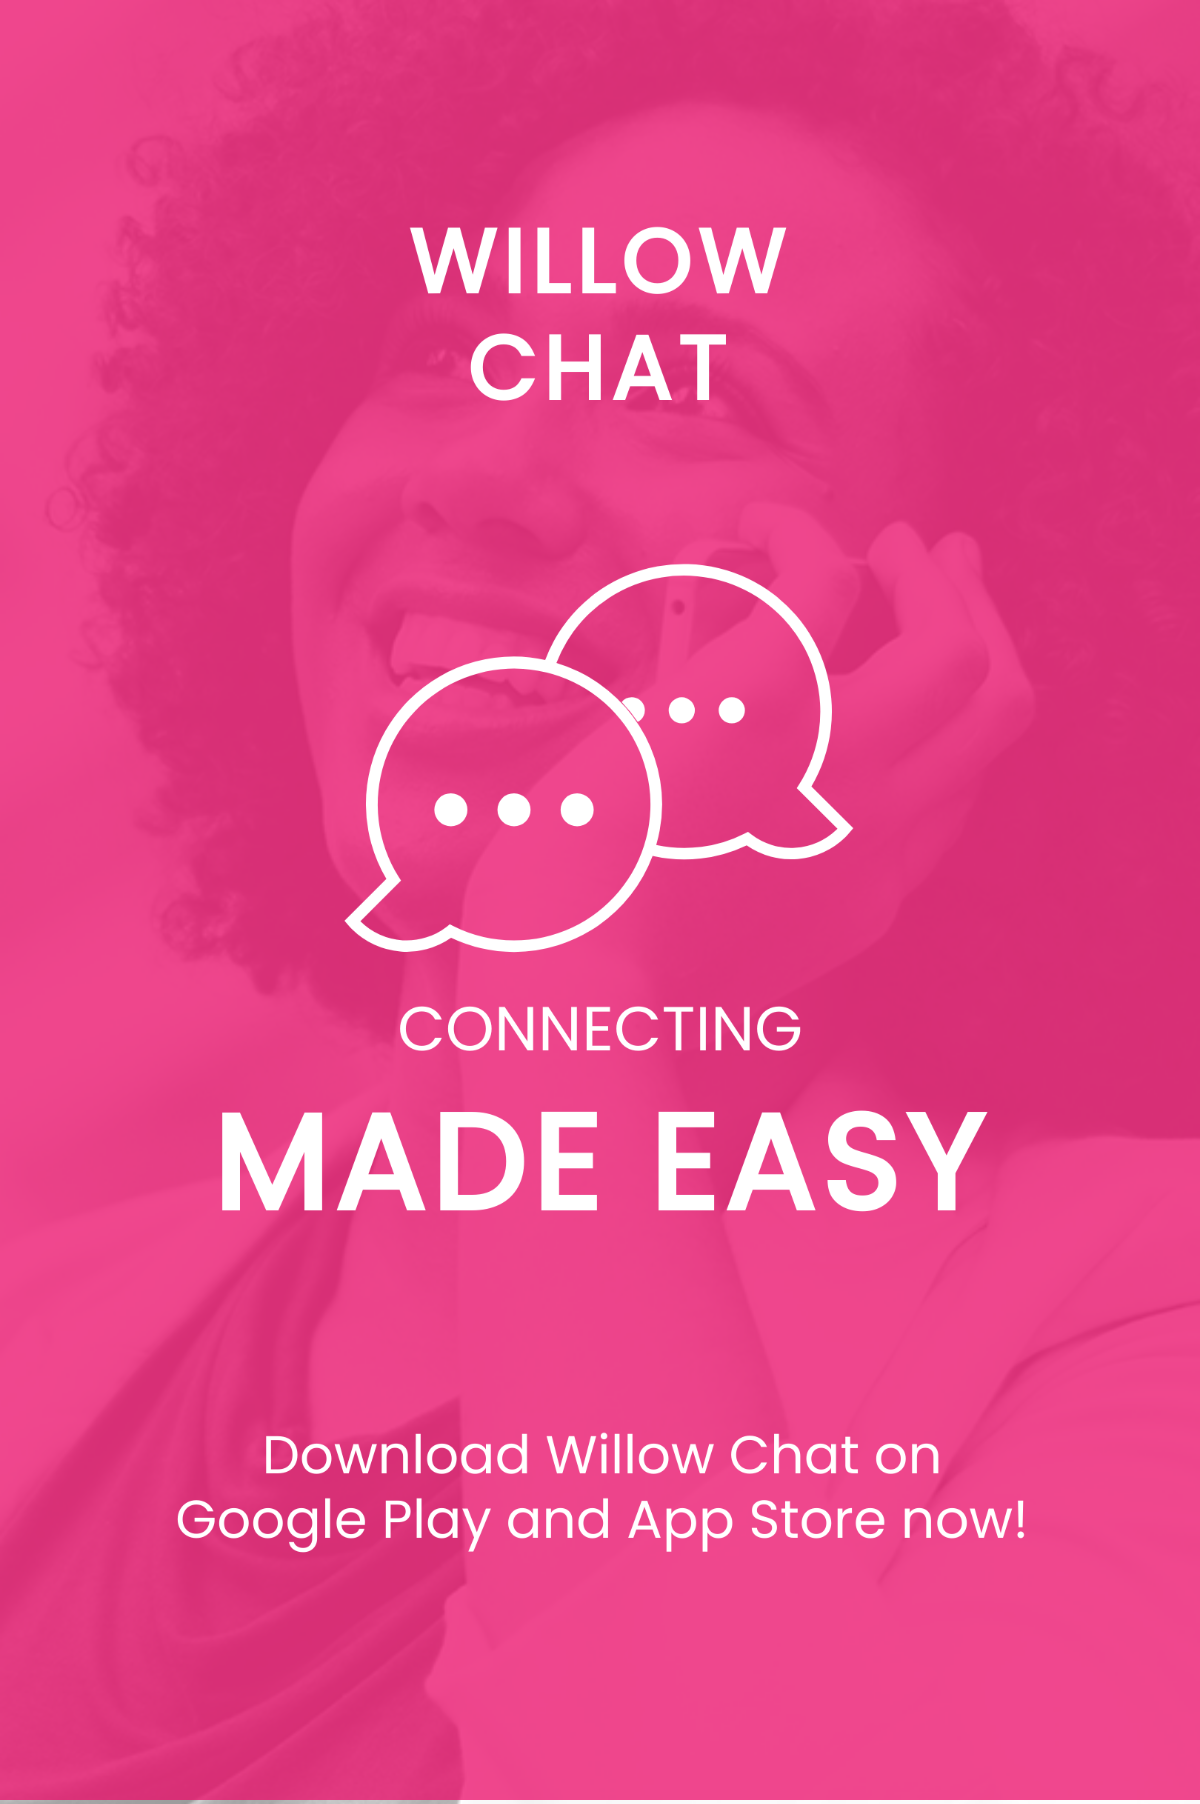 Free Chat App Promotion Tumblr Post Template